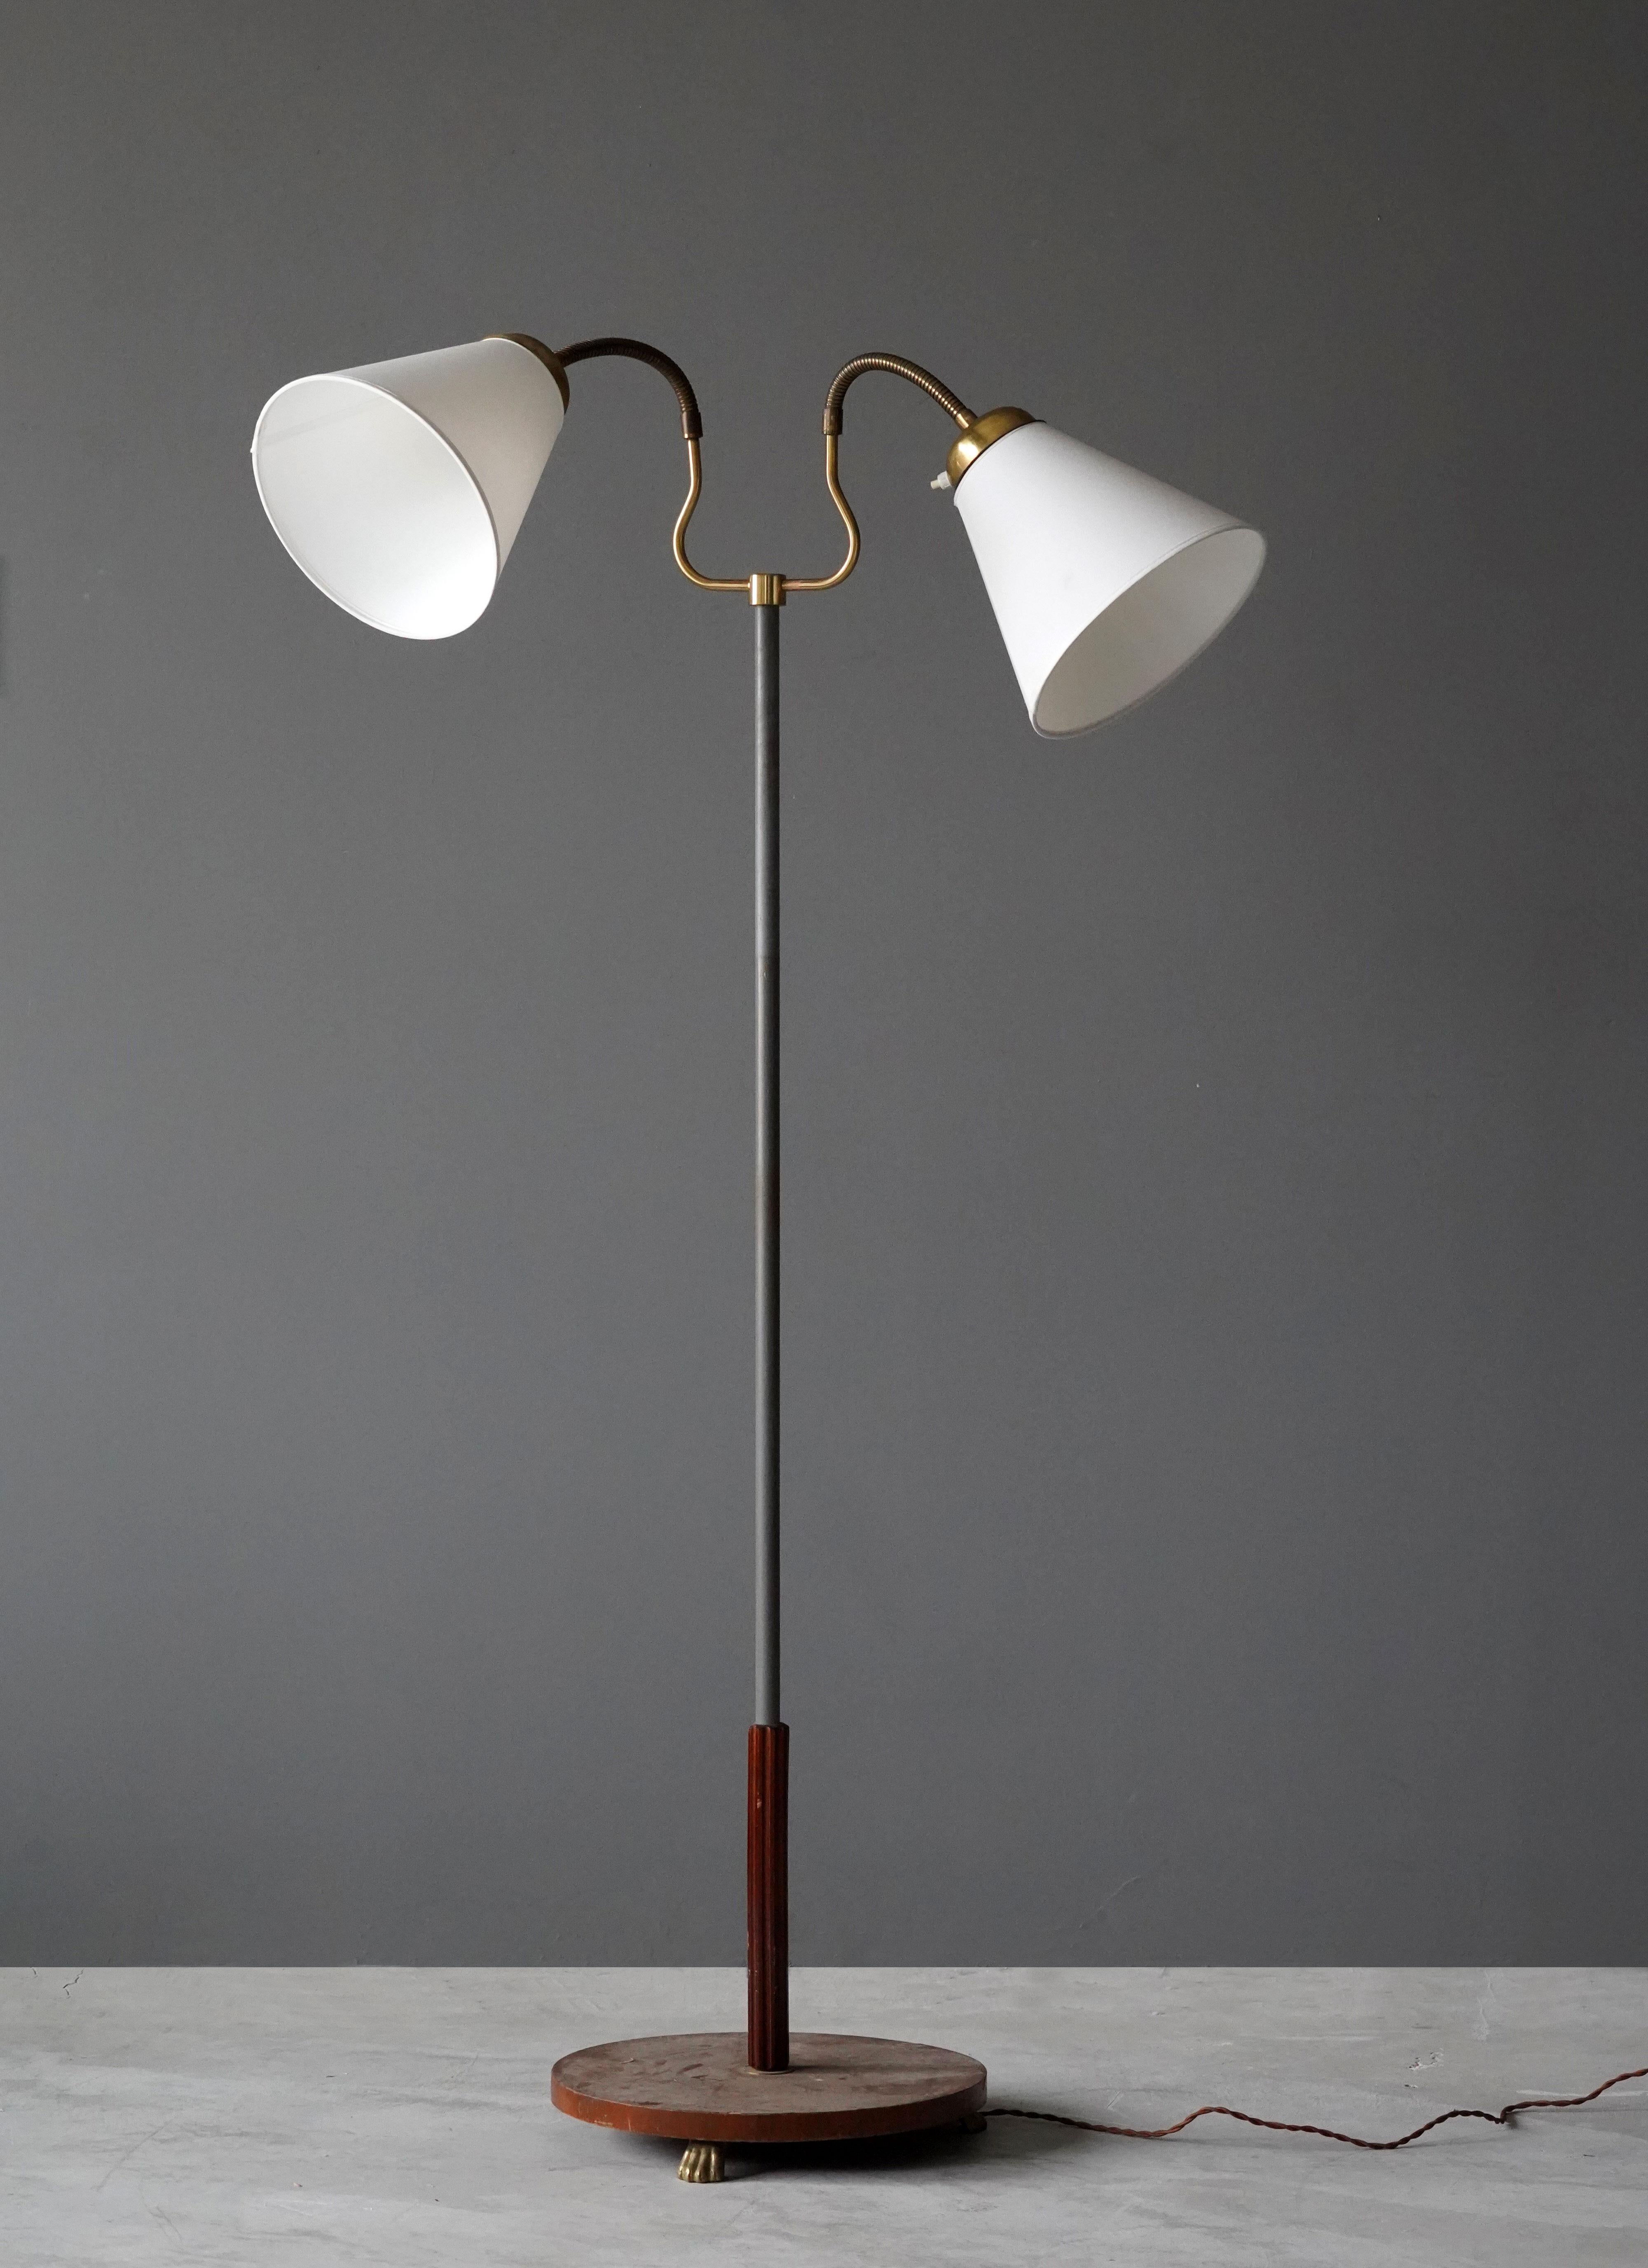 An adjustable two-armed functionalist floor lamp. With adjustable arms. Vintage lampshades. 

Dimensions variable. Stated measurements as illustrated.

Other designers of the period include Josef Frank, Paavo Tynell, Hans Agne Jacobsen, and